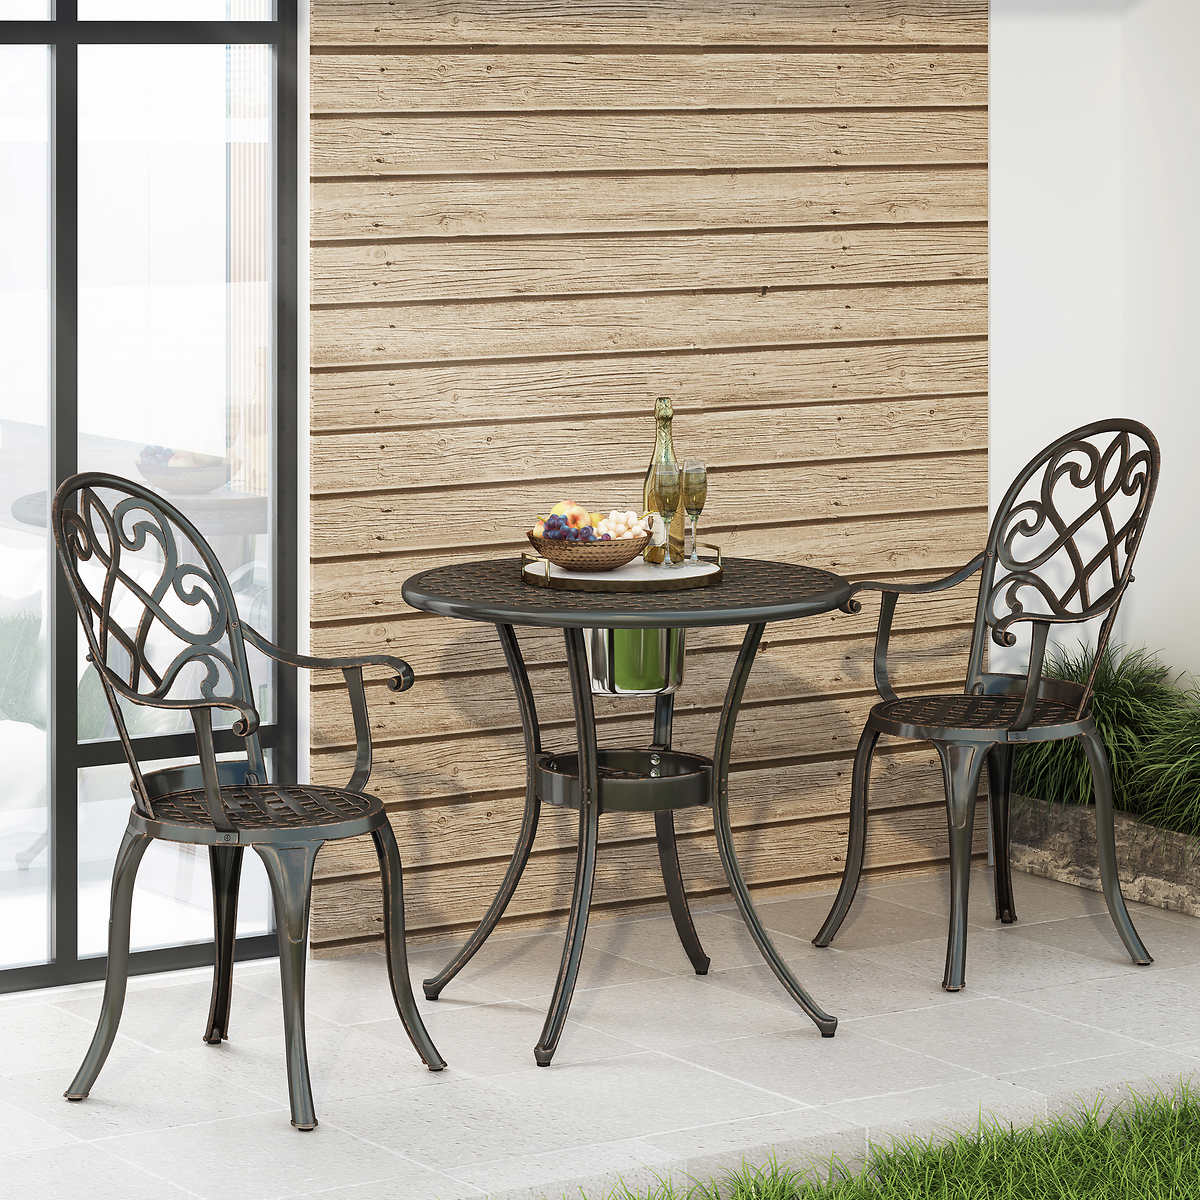 3 piece bistro set with cushions